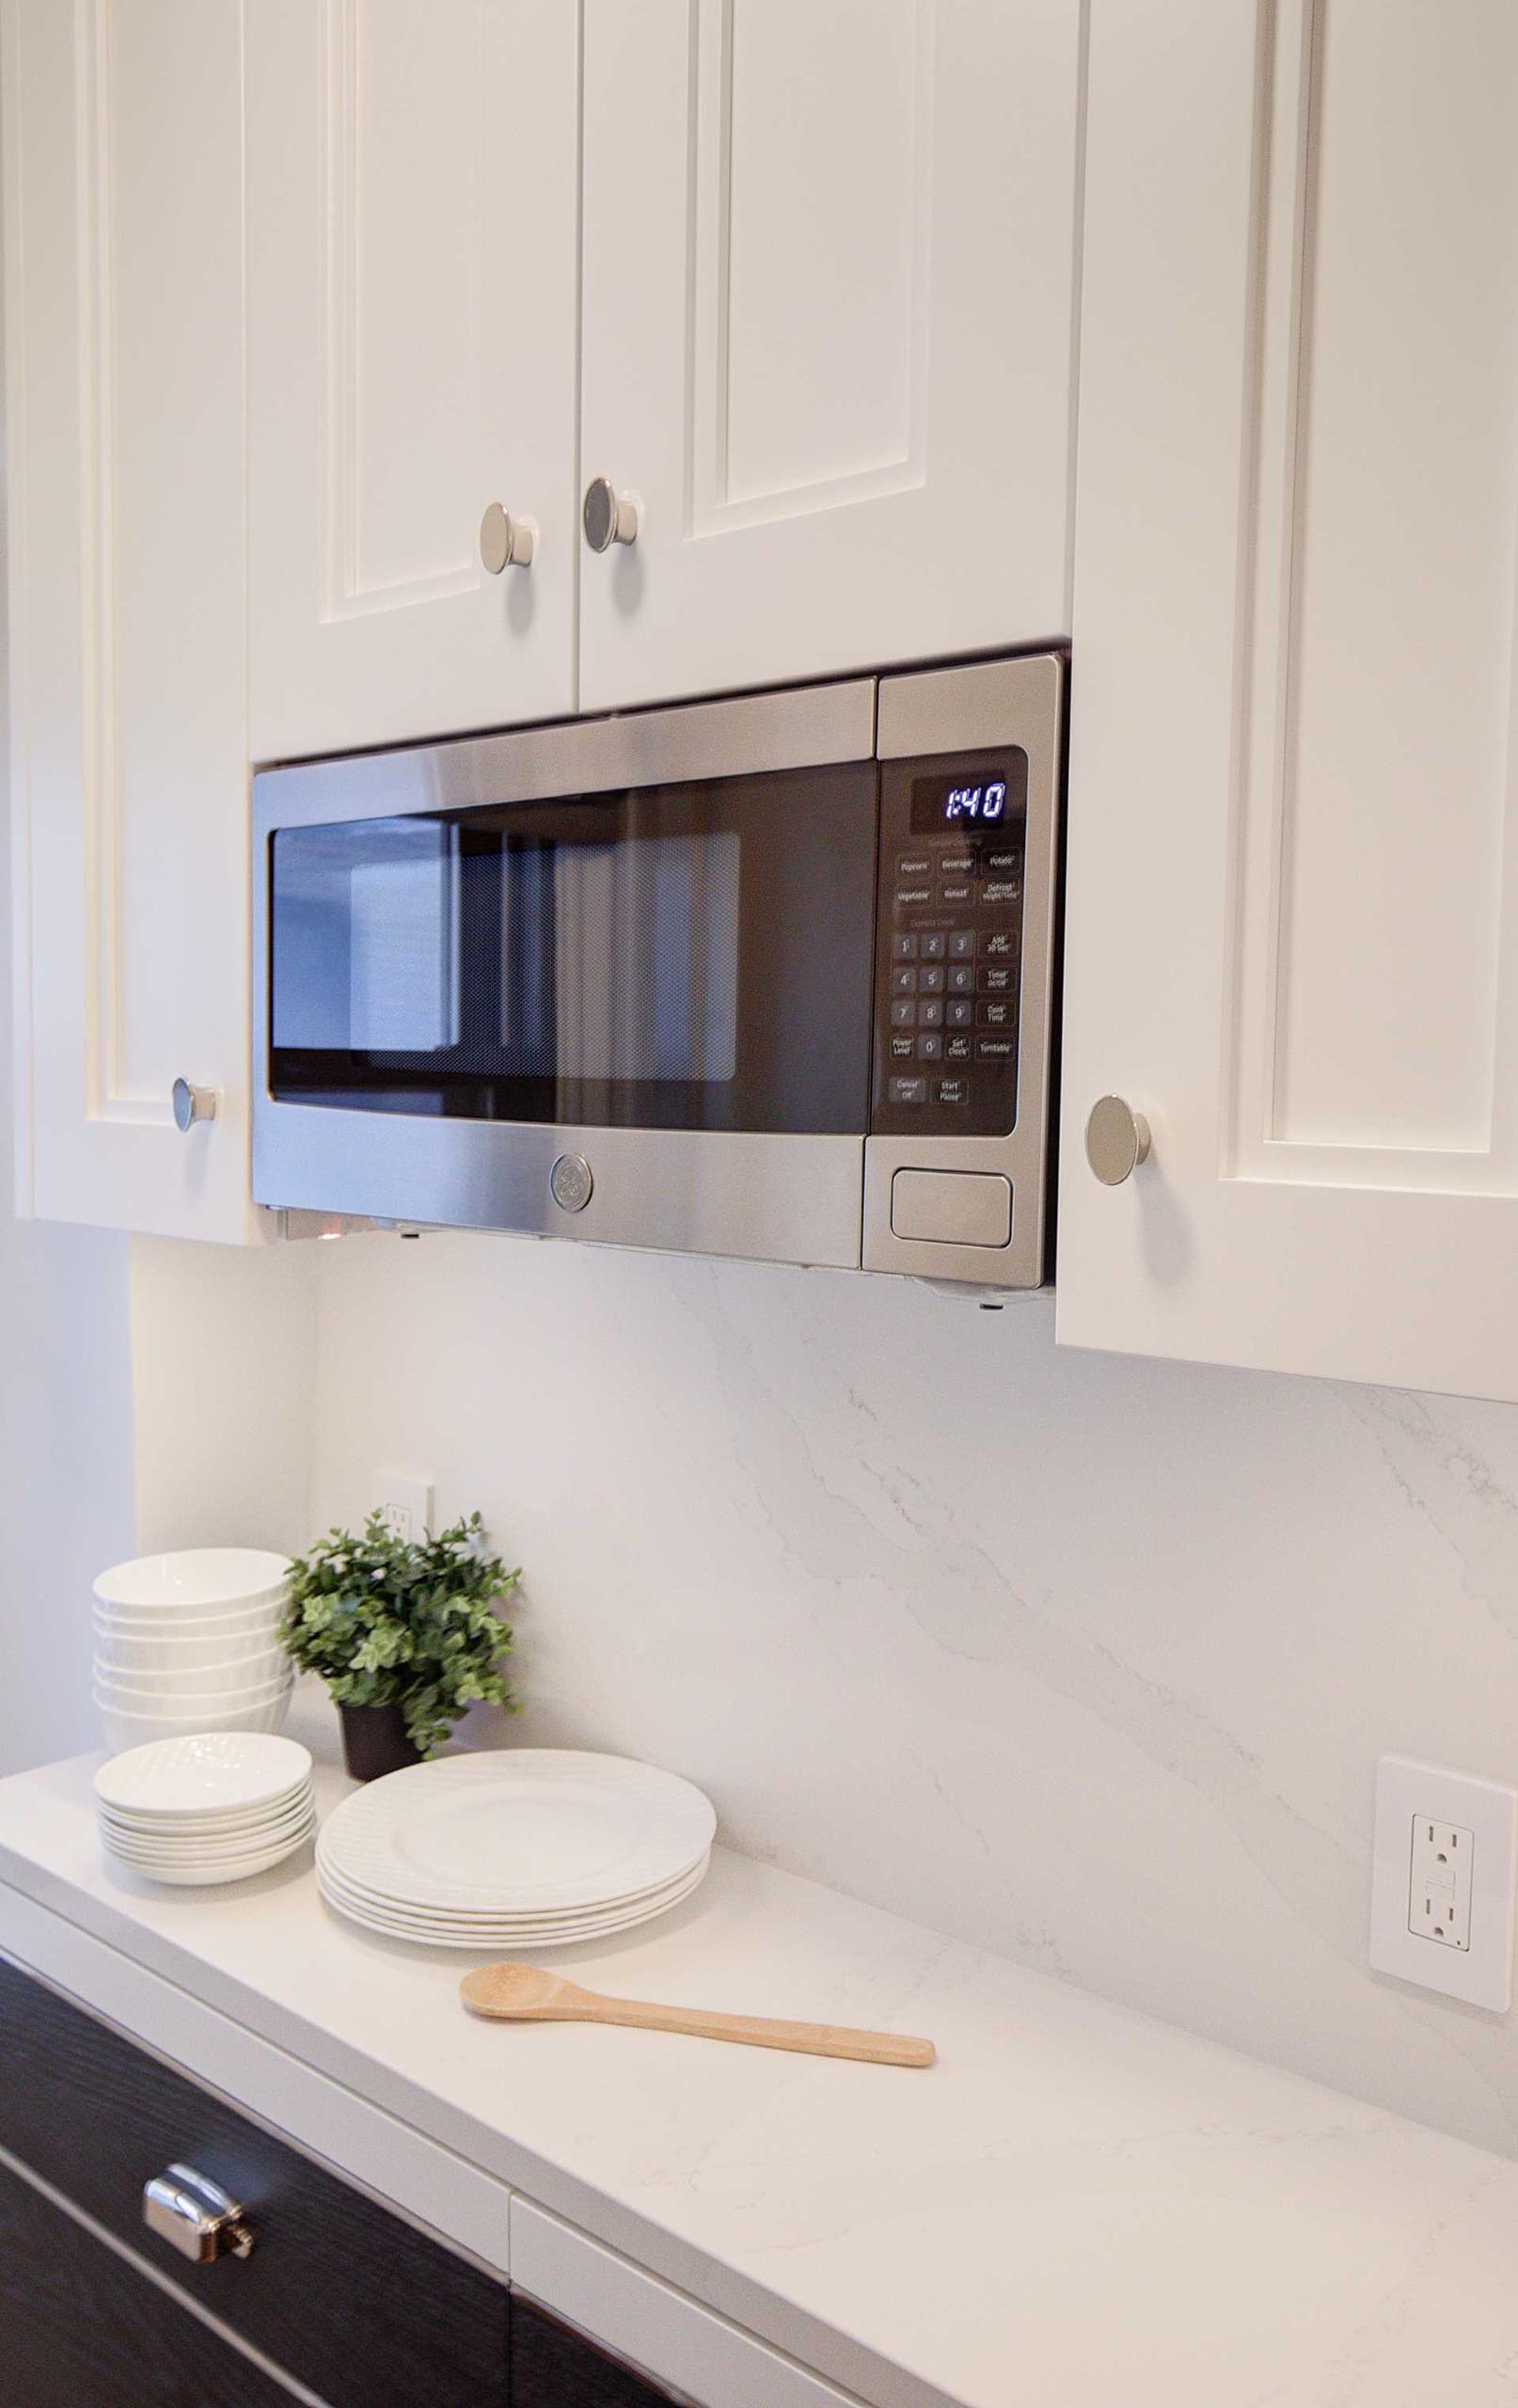 A contemporary kitchen with a built-in microwave that sits flush with the surrounding cabinets.